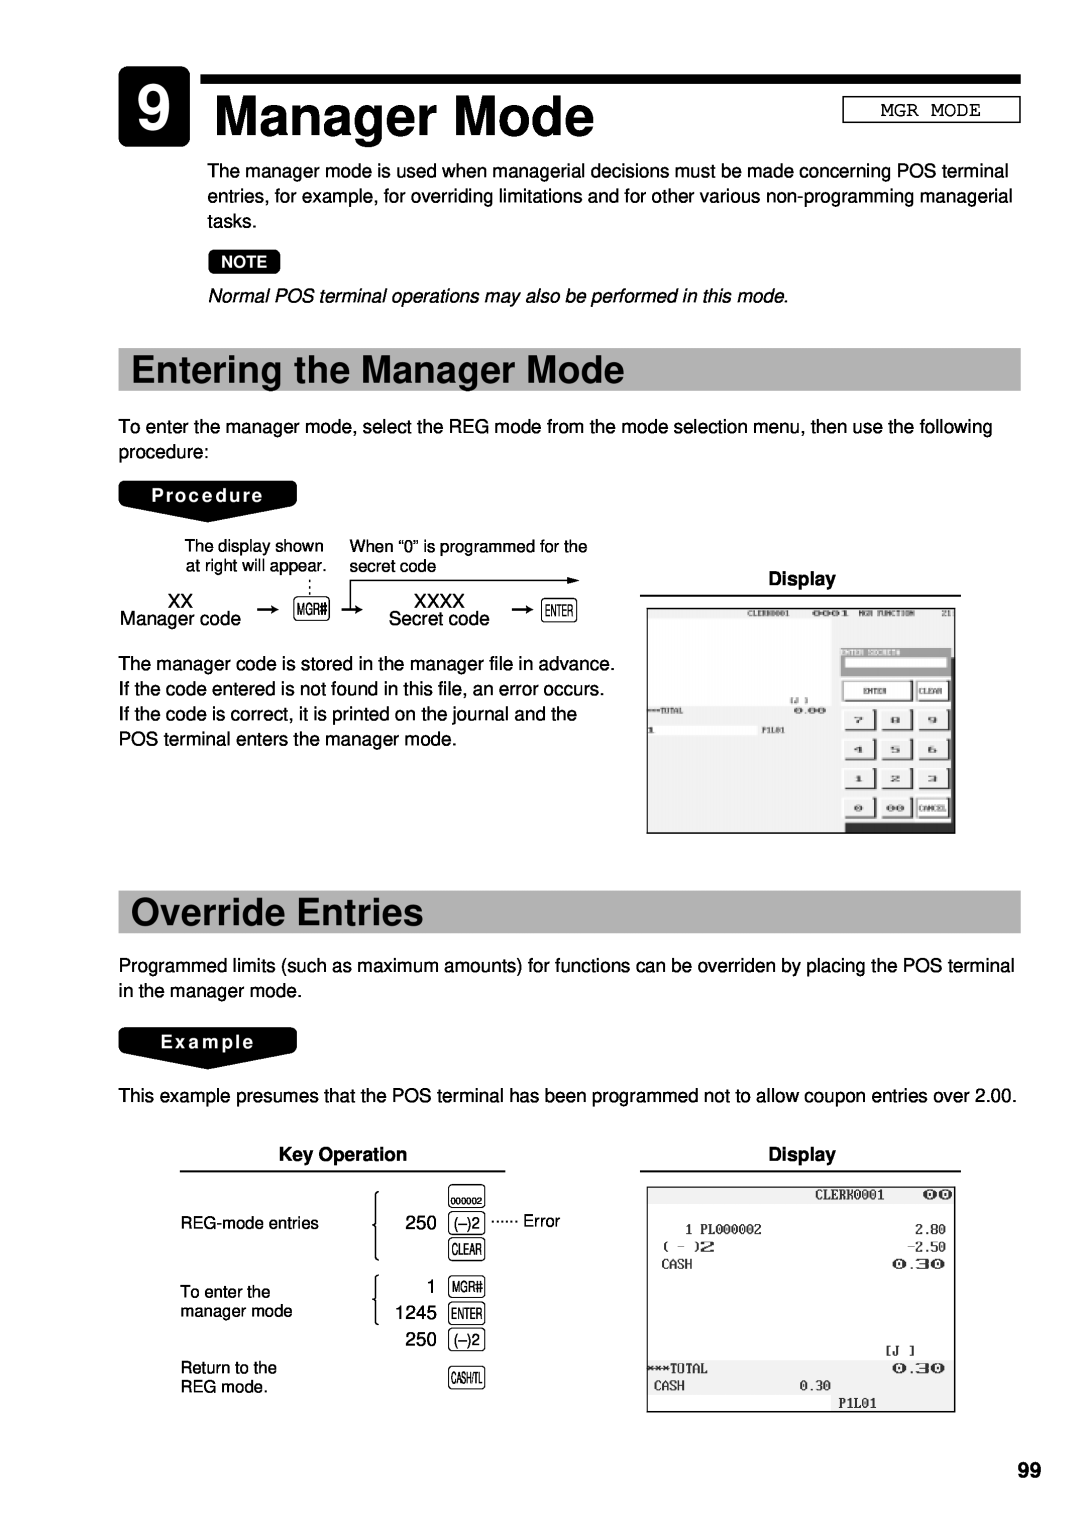 Sharp UP-3300 9Manager Mode, Entering the Manager Mode, Override Entries, Mgr Mode, Procedure, Display, Example 